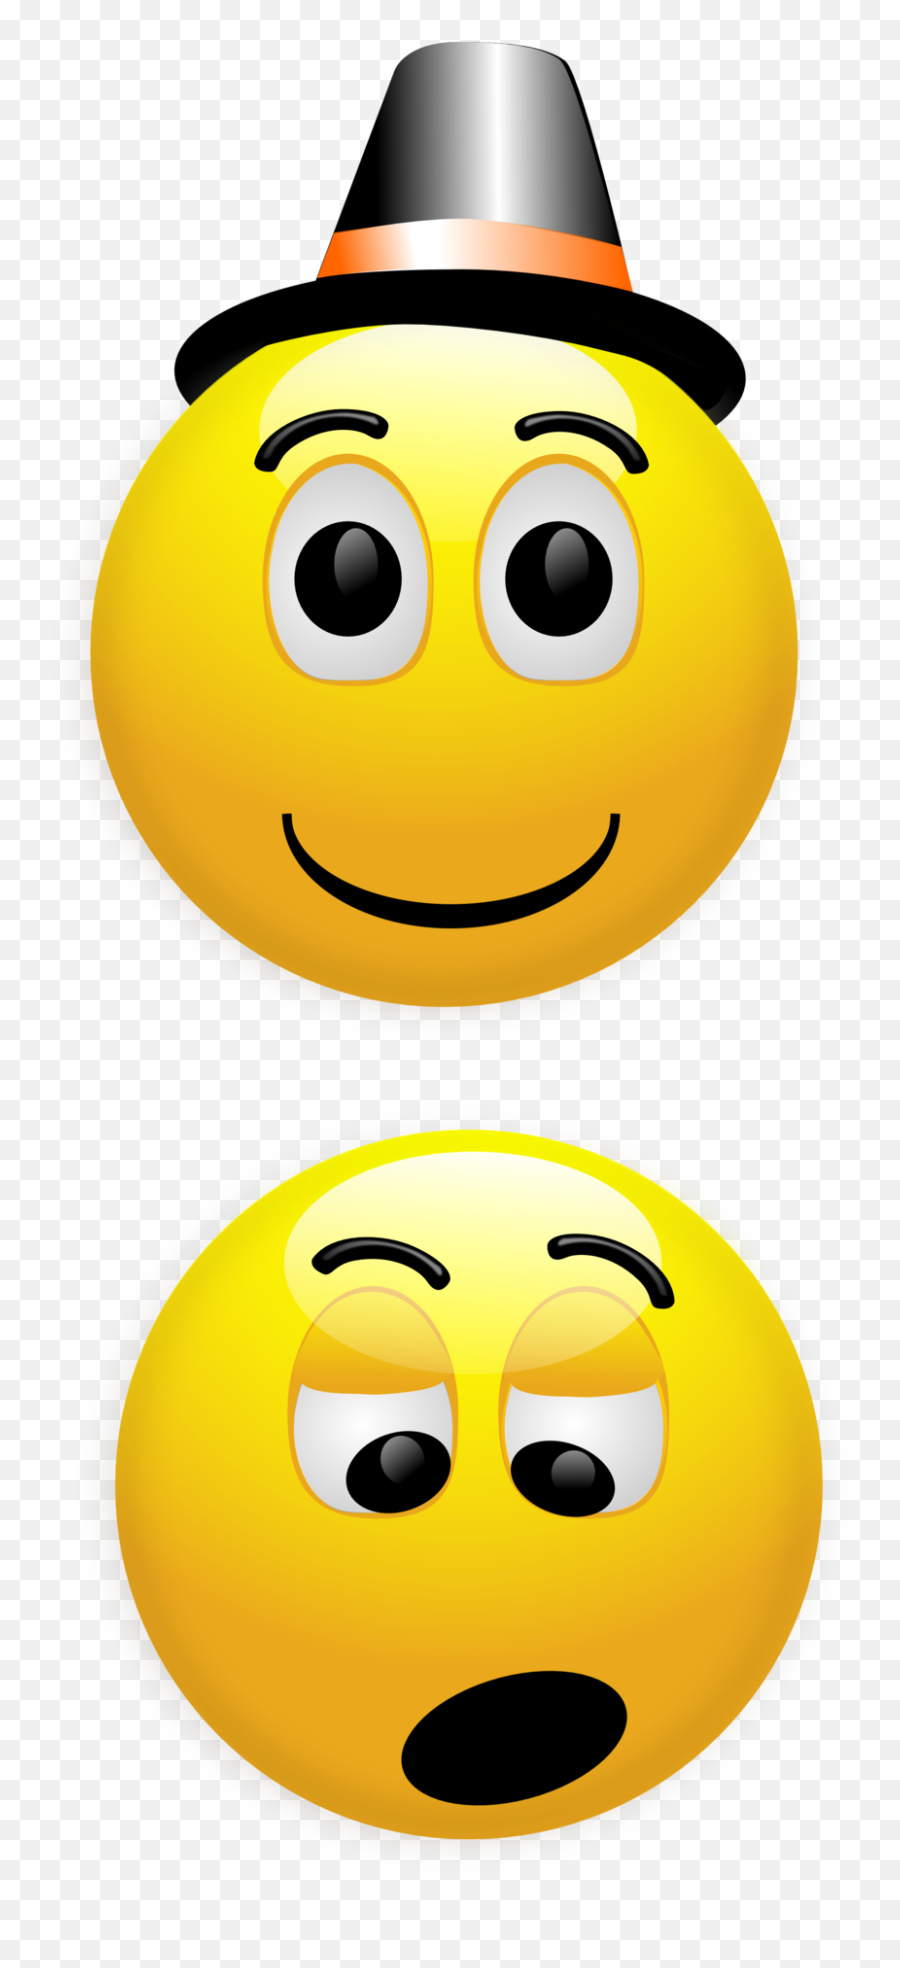 Free Clip Art Smiley 2 By Inky2010 - Bored Clipart Facial Expression Emoji,Leafs Emoticon